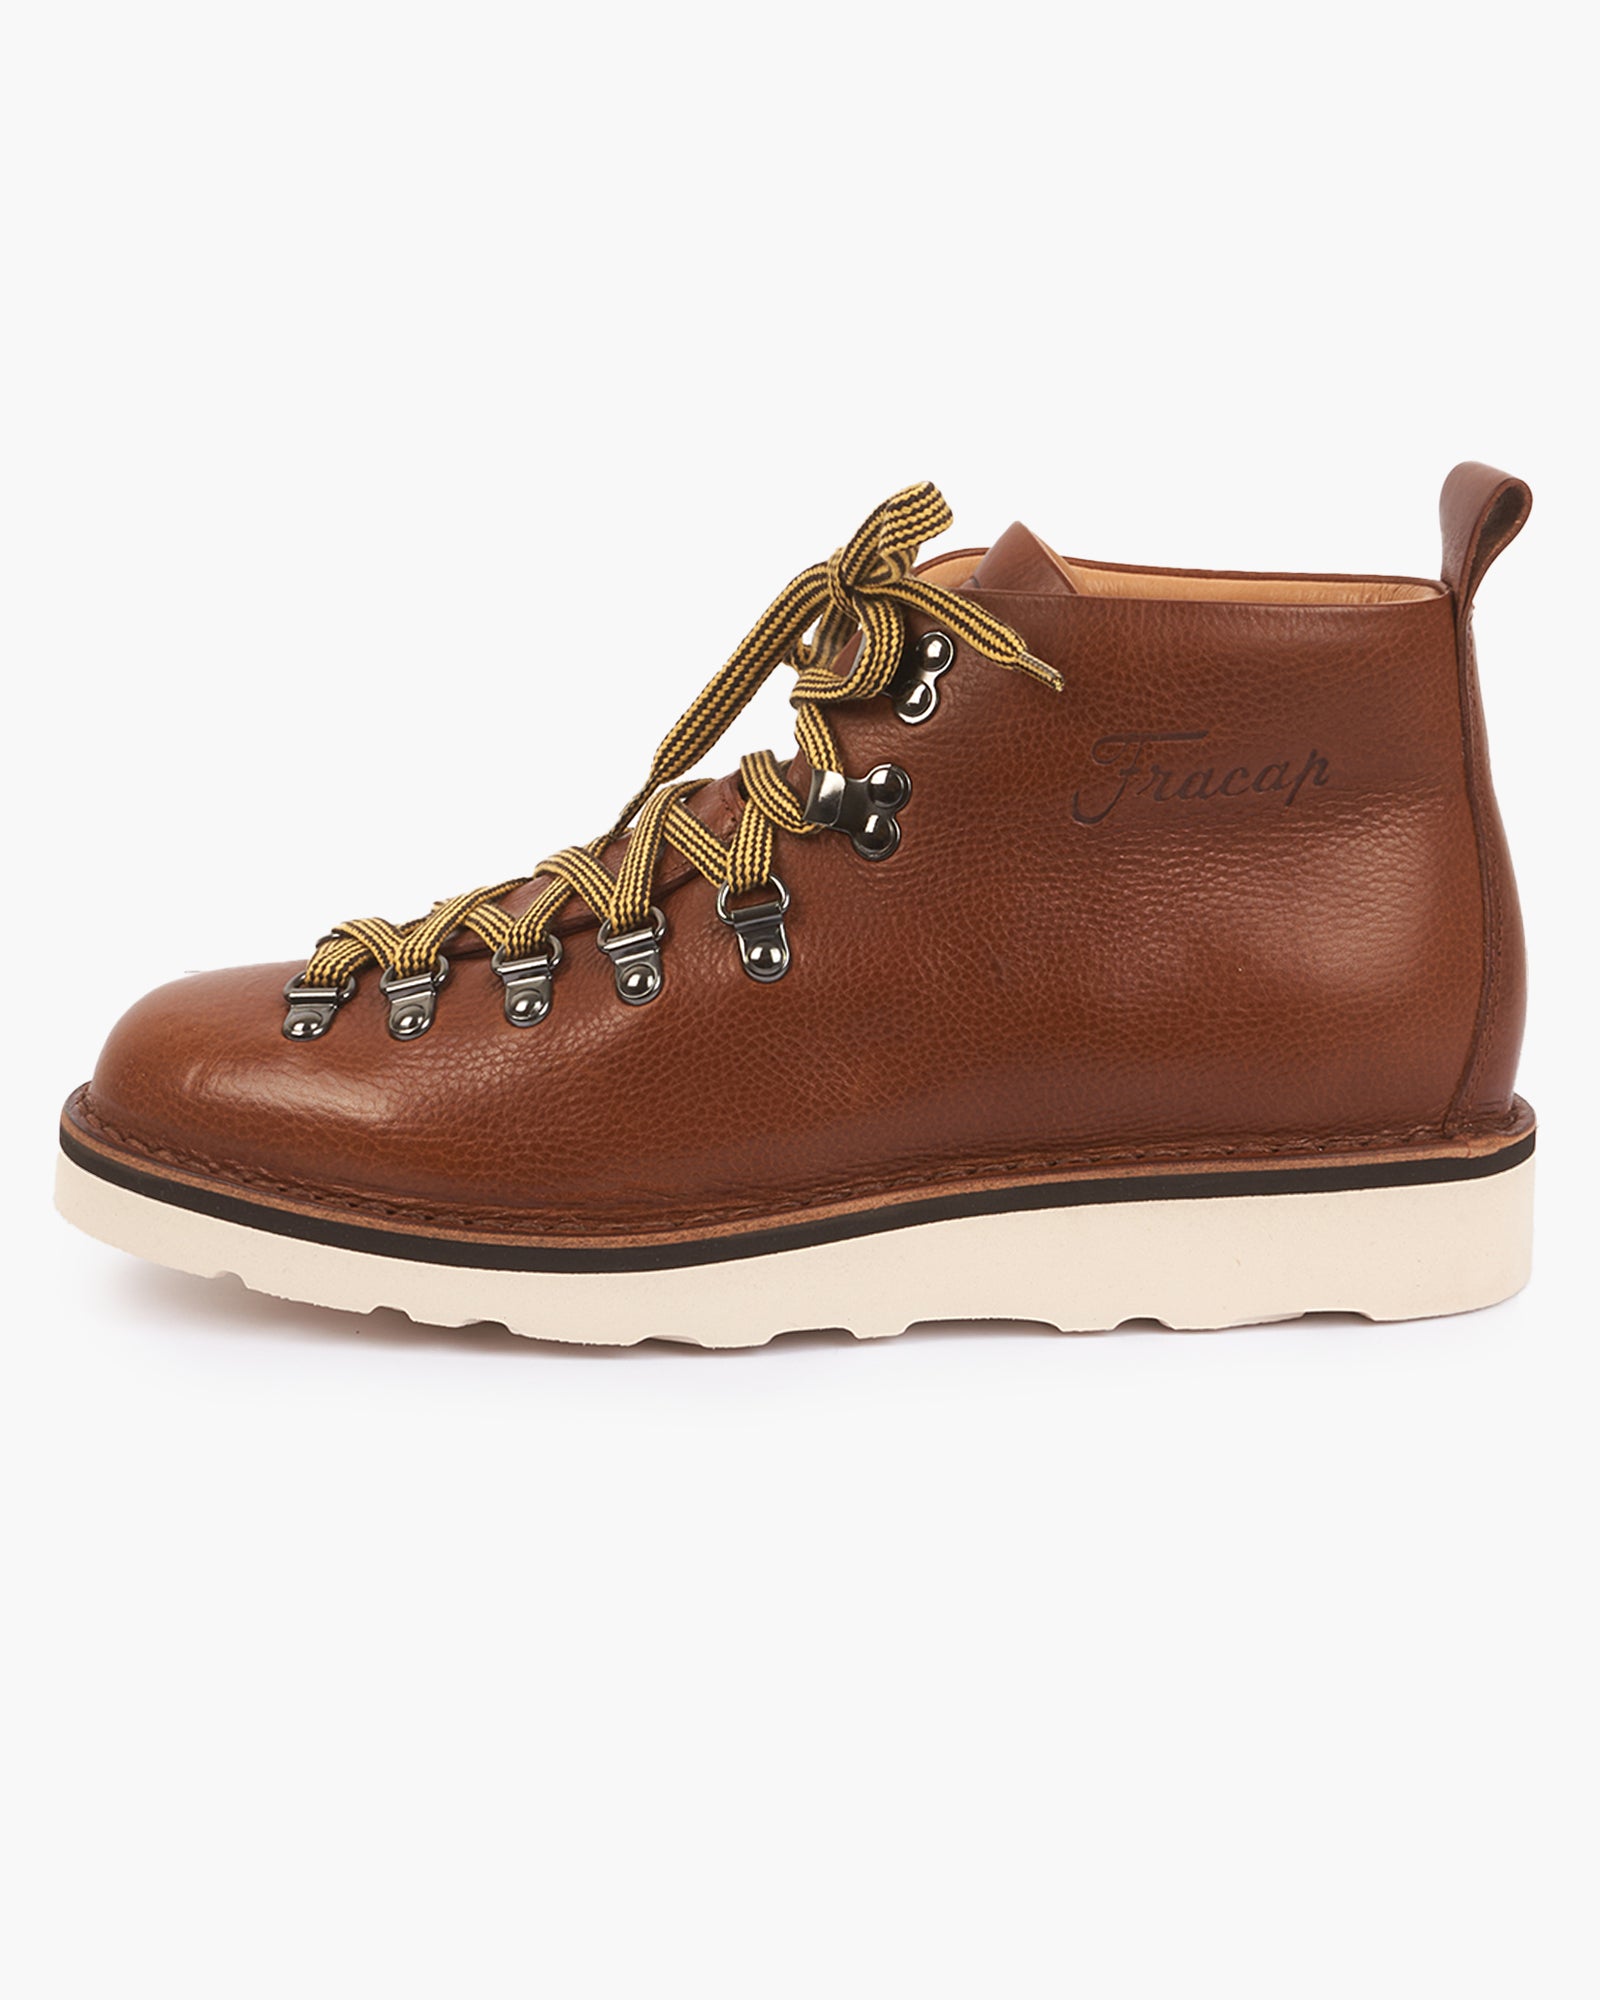 Fracap M120 Magnifico Leather Boots - Brandy / White Cristy Sole ...